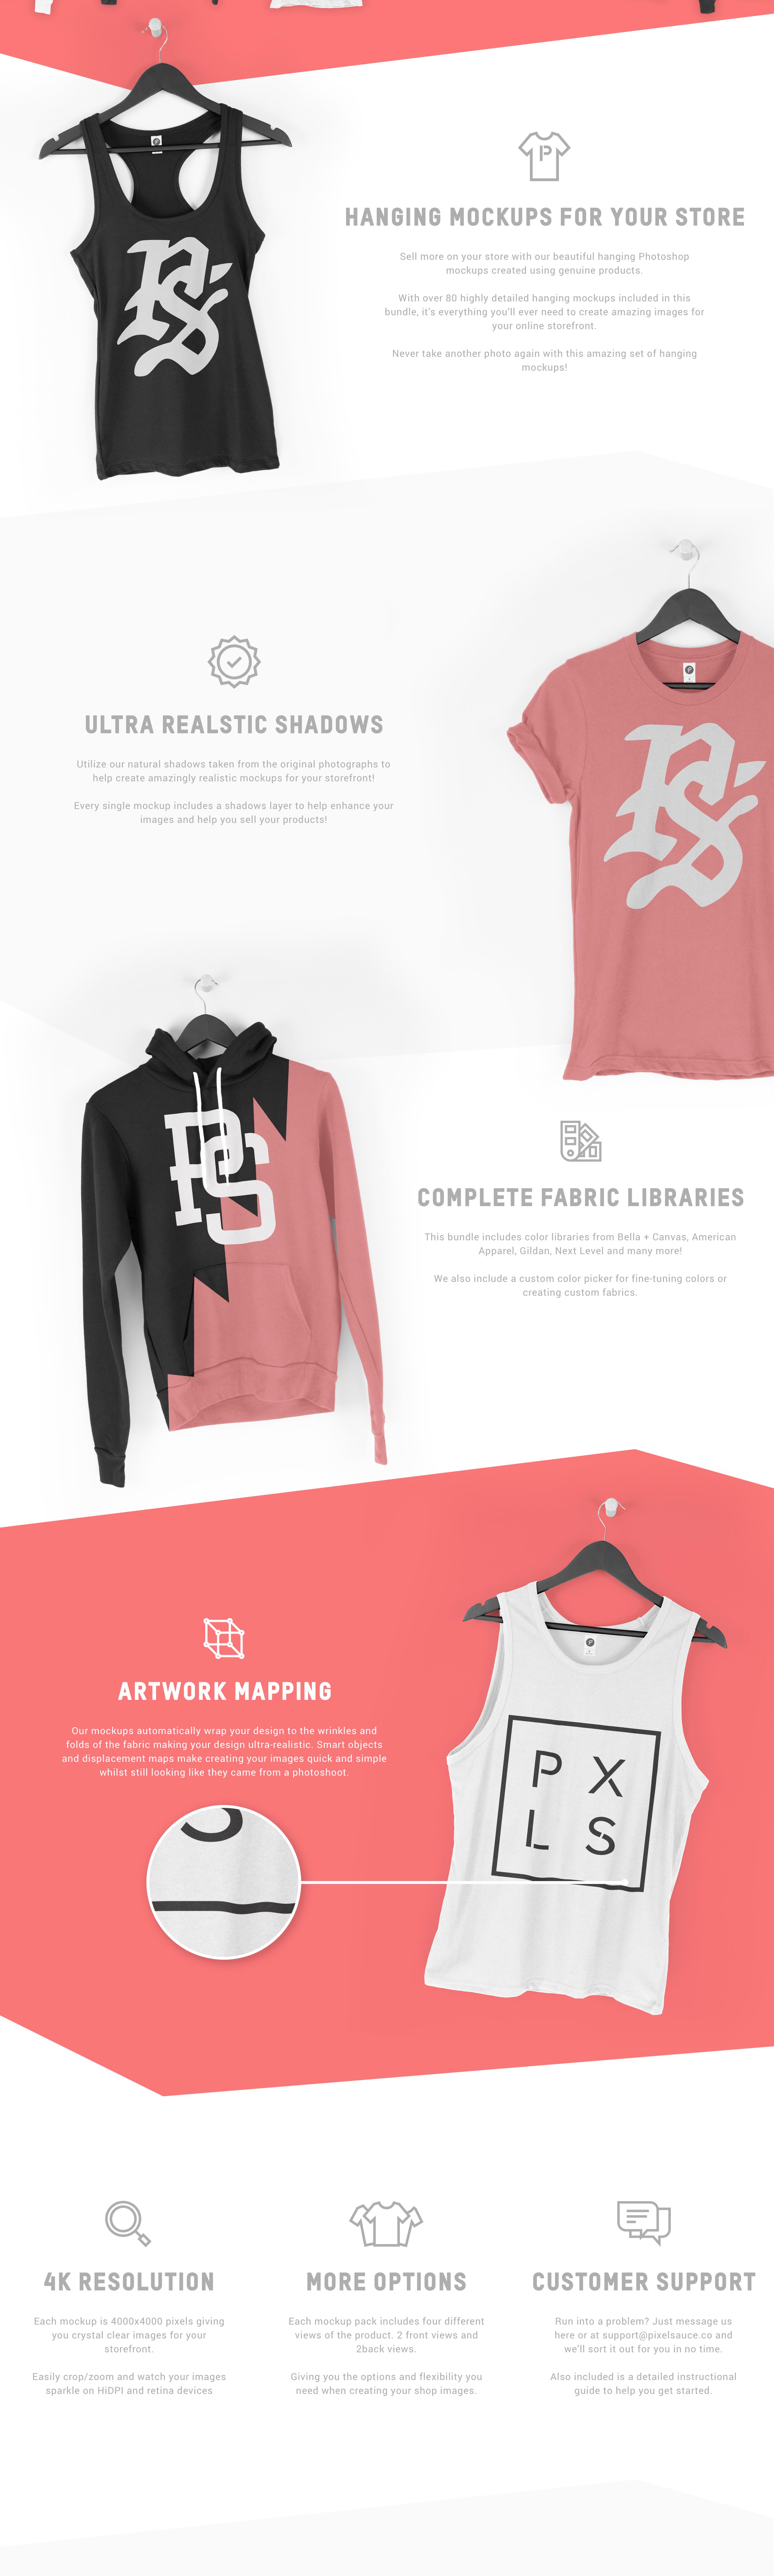 Hanging Apparel Mockups Collection